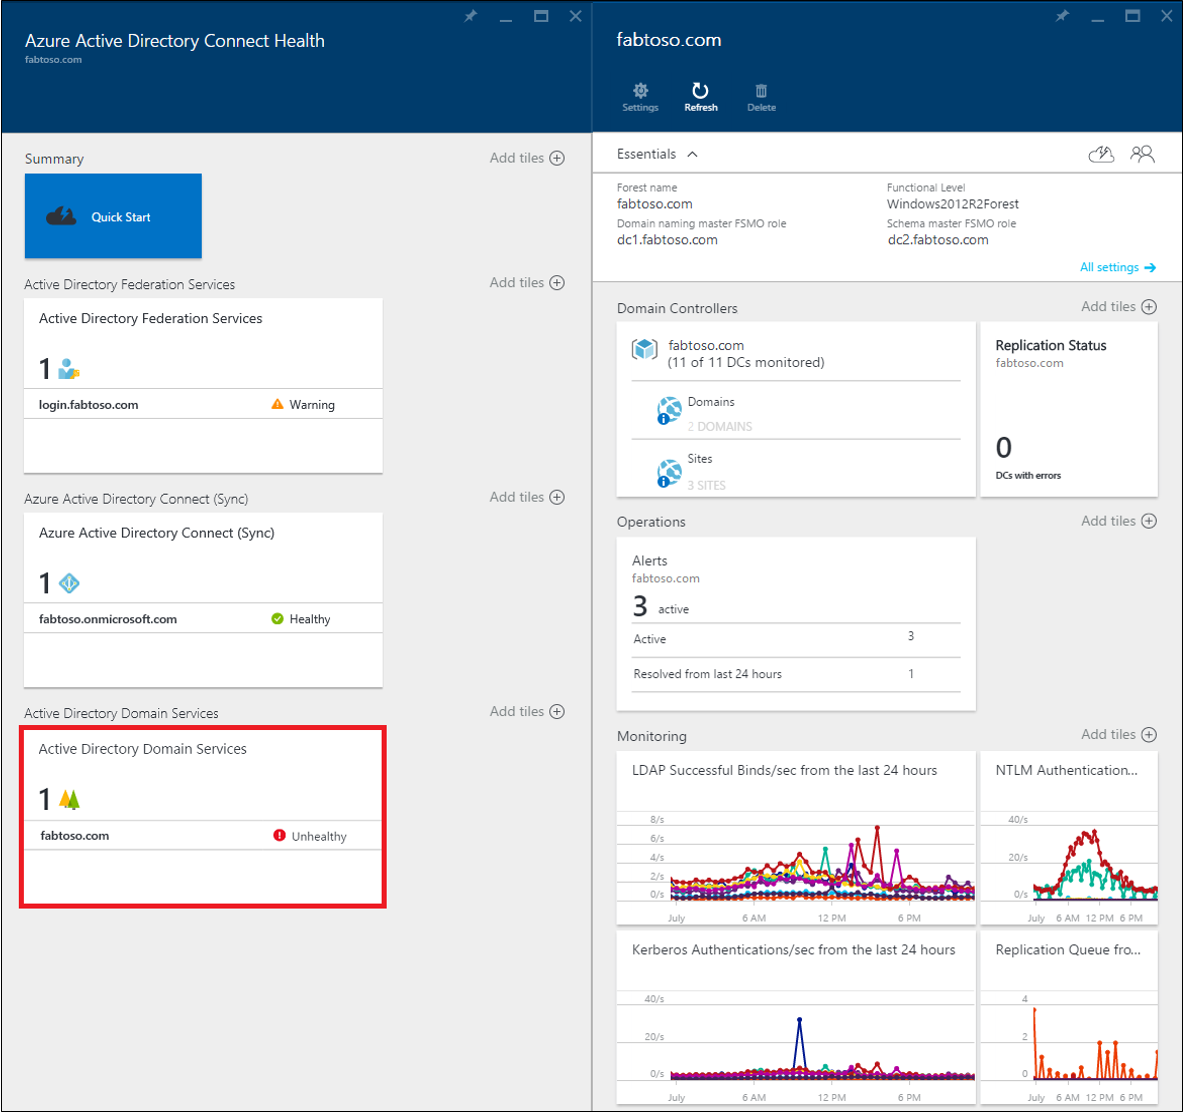 Azure AD Connect Health for Active Directory Domain Services console [Image Credit: Microsoft]